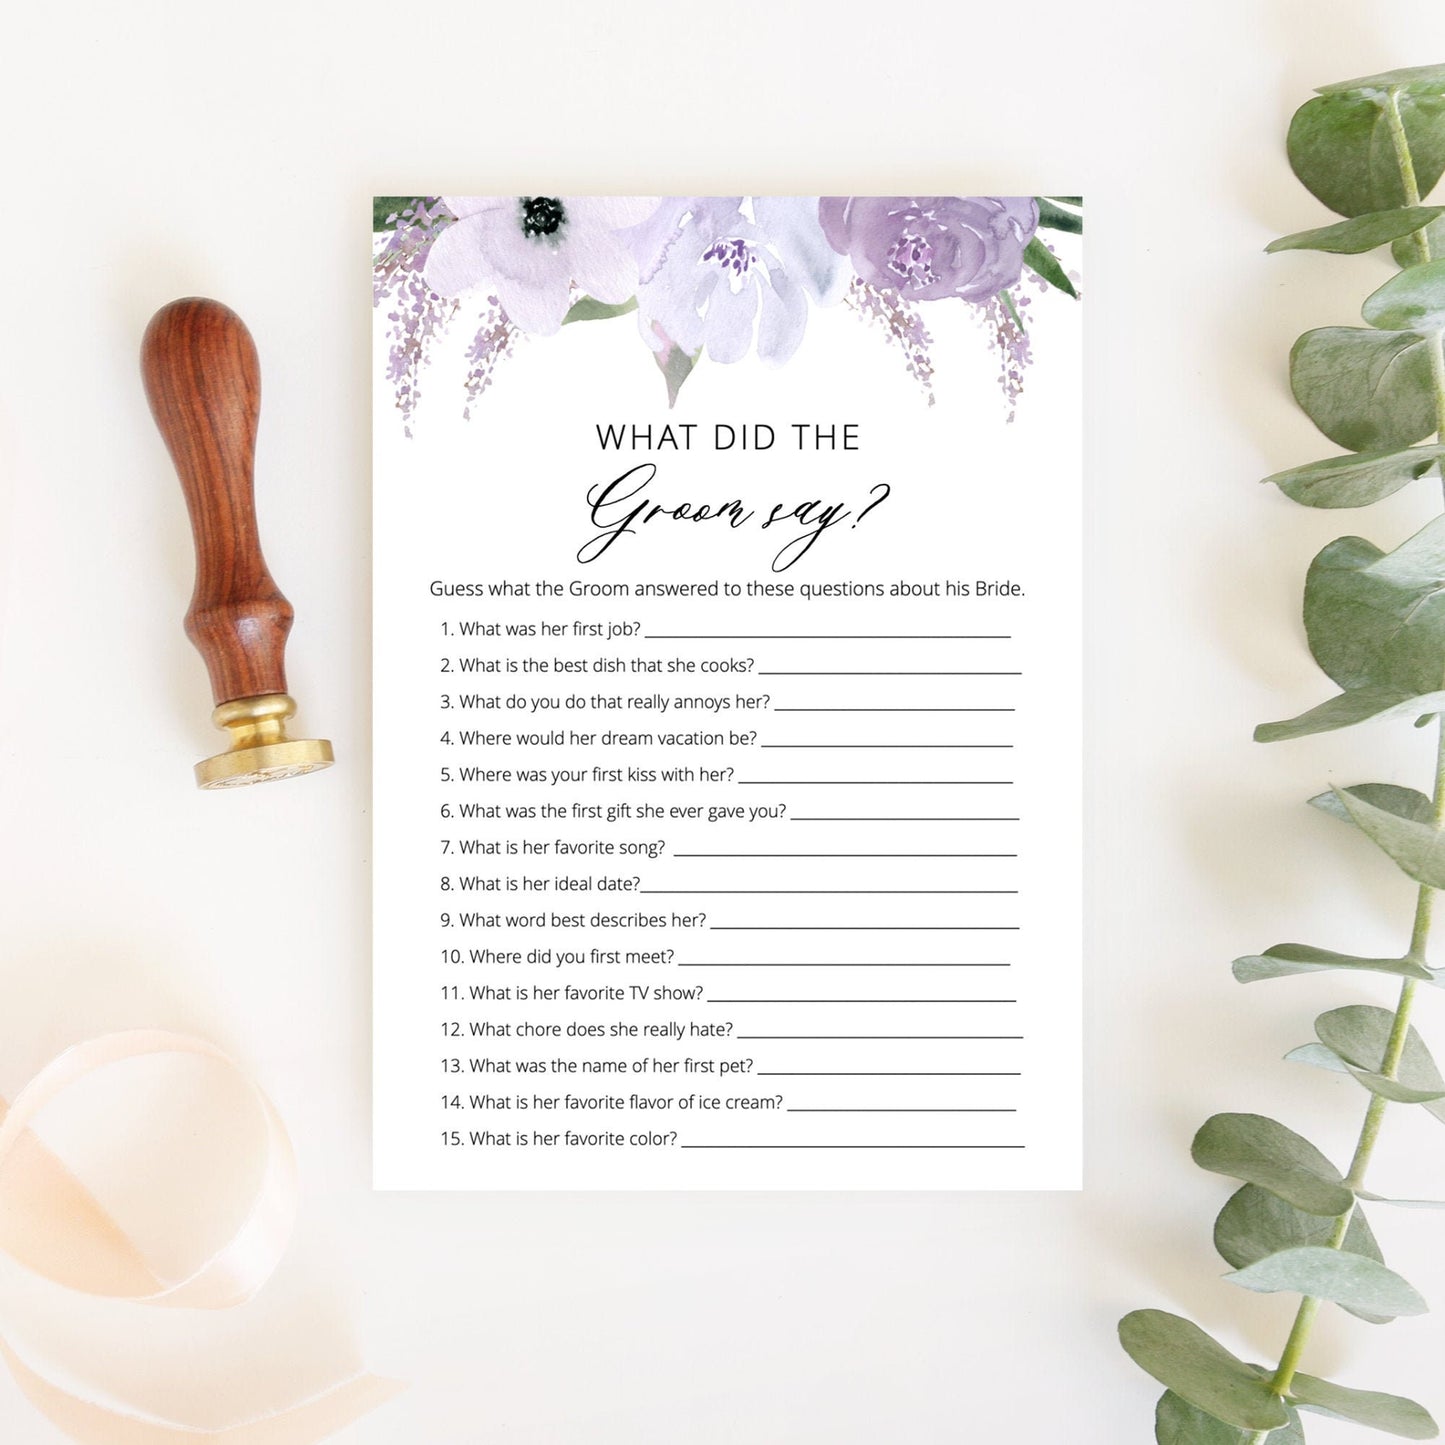 Editable What Did the Groom Say Purple Lavender Bridal Shower Games Wedding Games Template